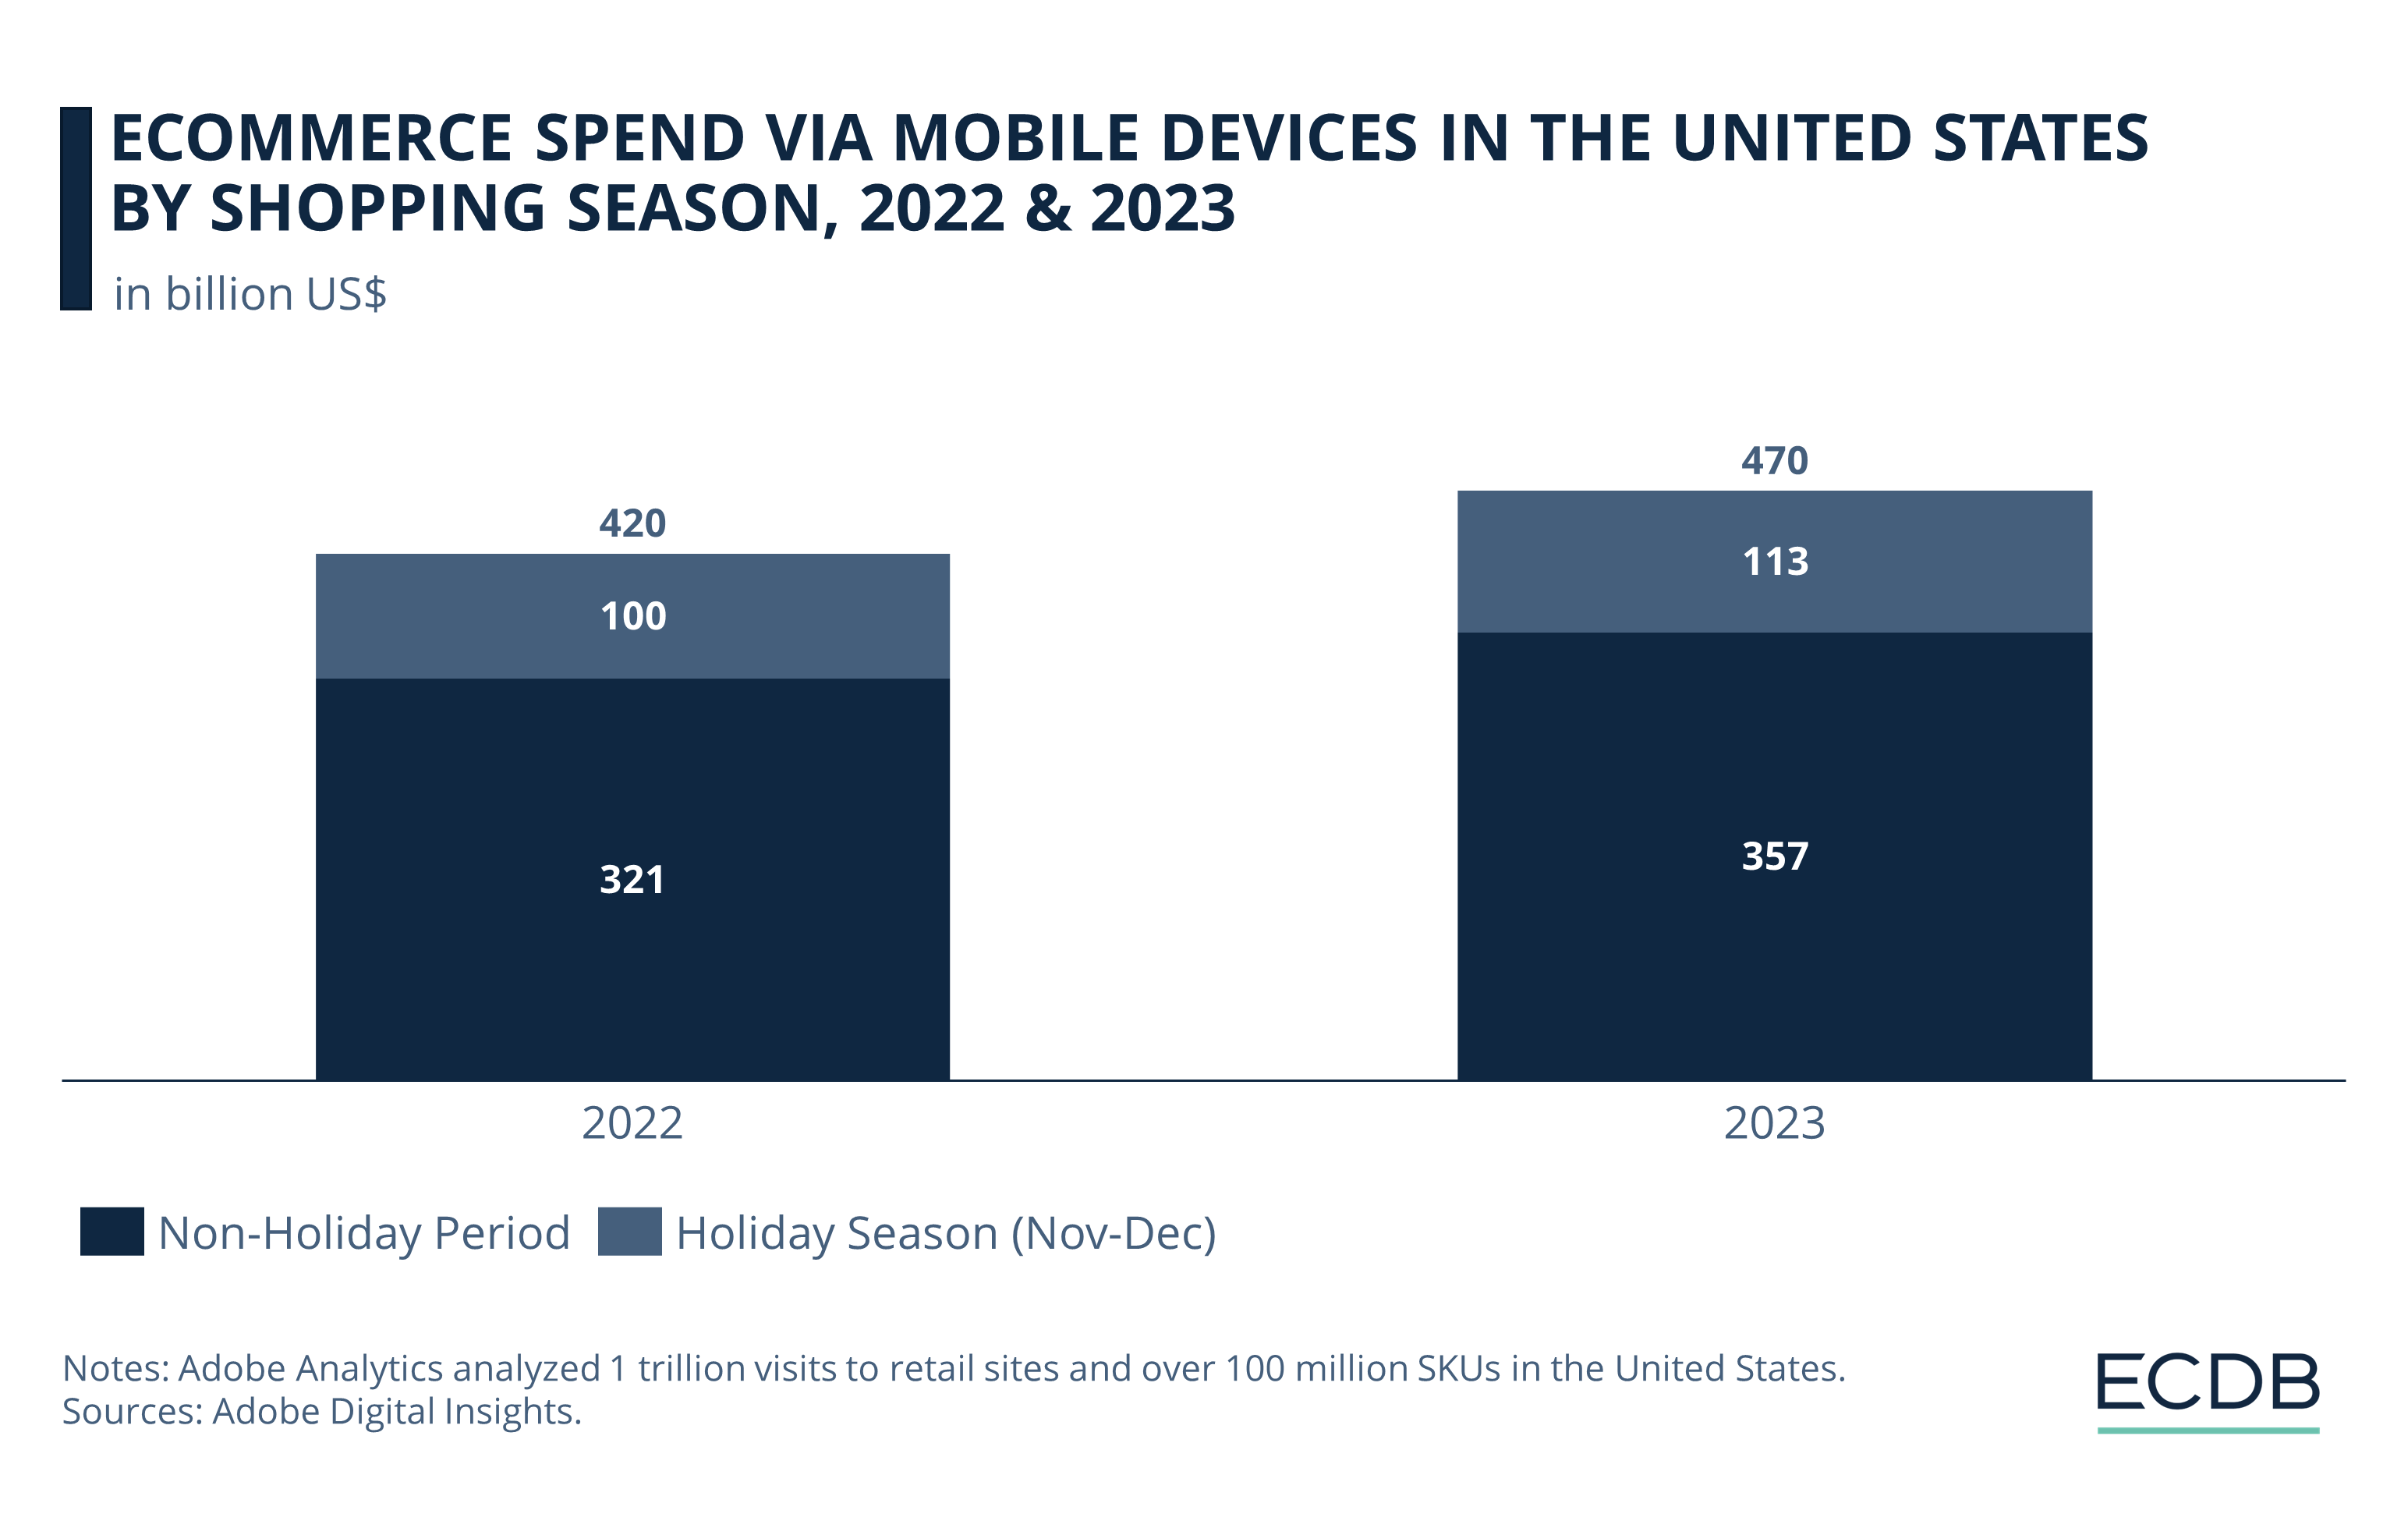 eCommerce Spend via Mobile Devices by U.S. Shopping Season, 2022 & 2023